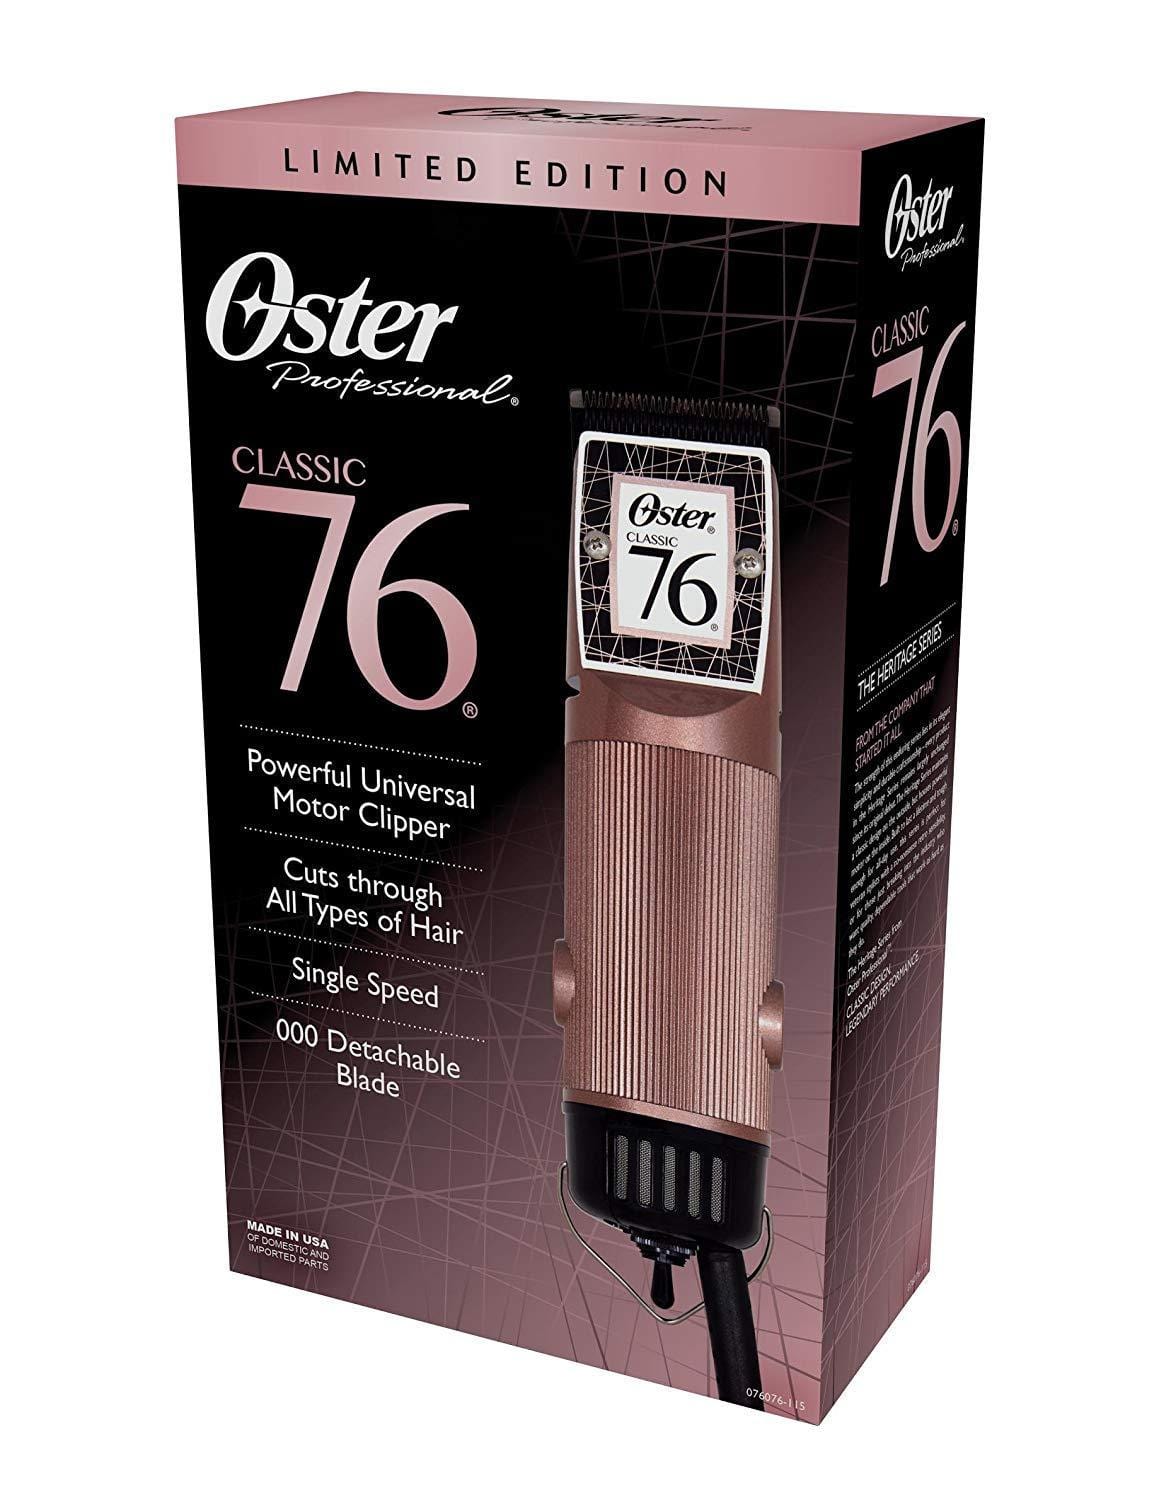 OSTER_Classic 76 Limited Edition Rose Gold_Cosmetic World